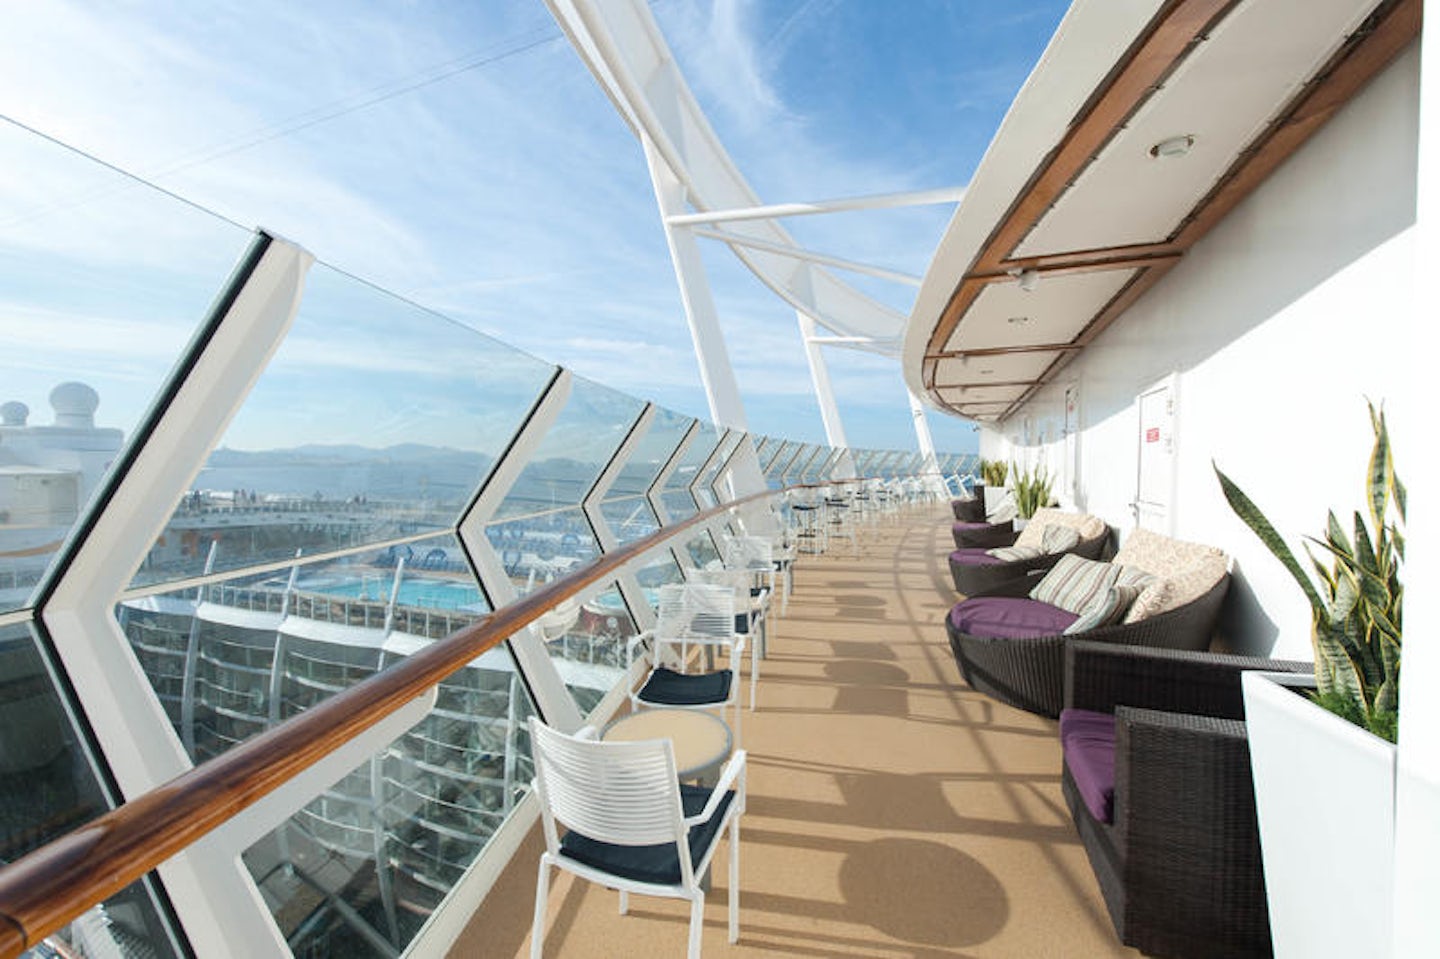 The Suite Sun Deck on Allure of the Seas